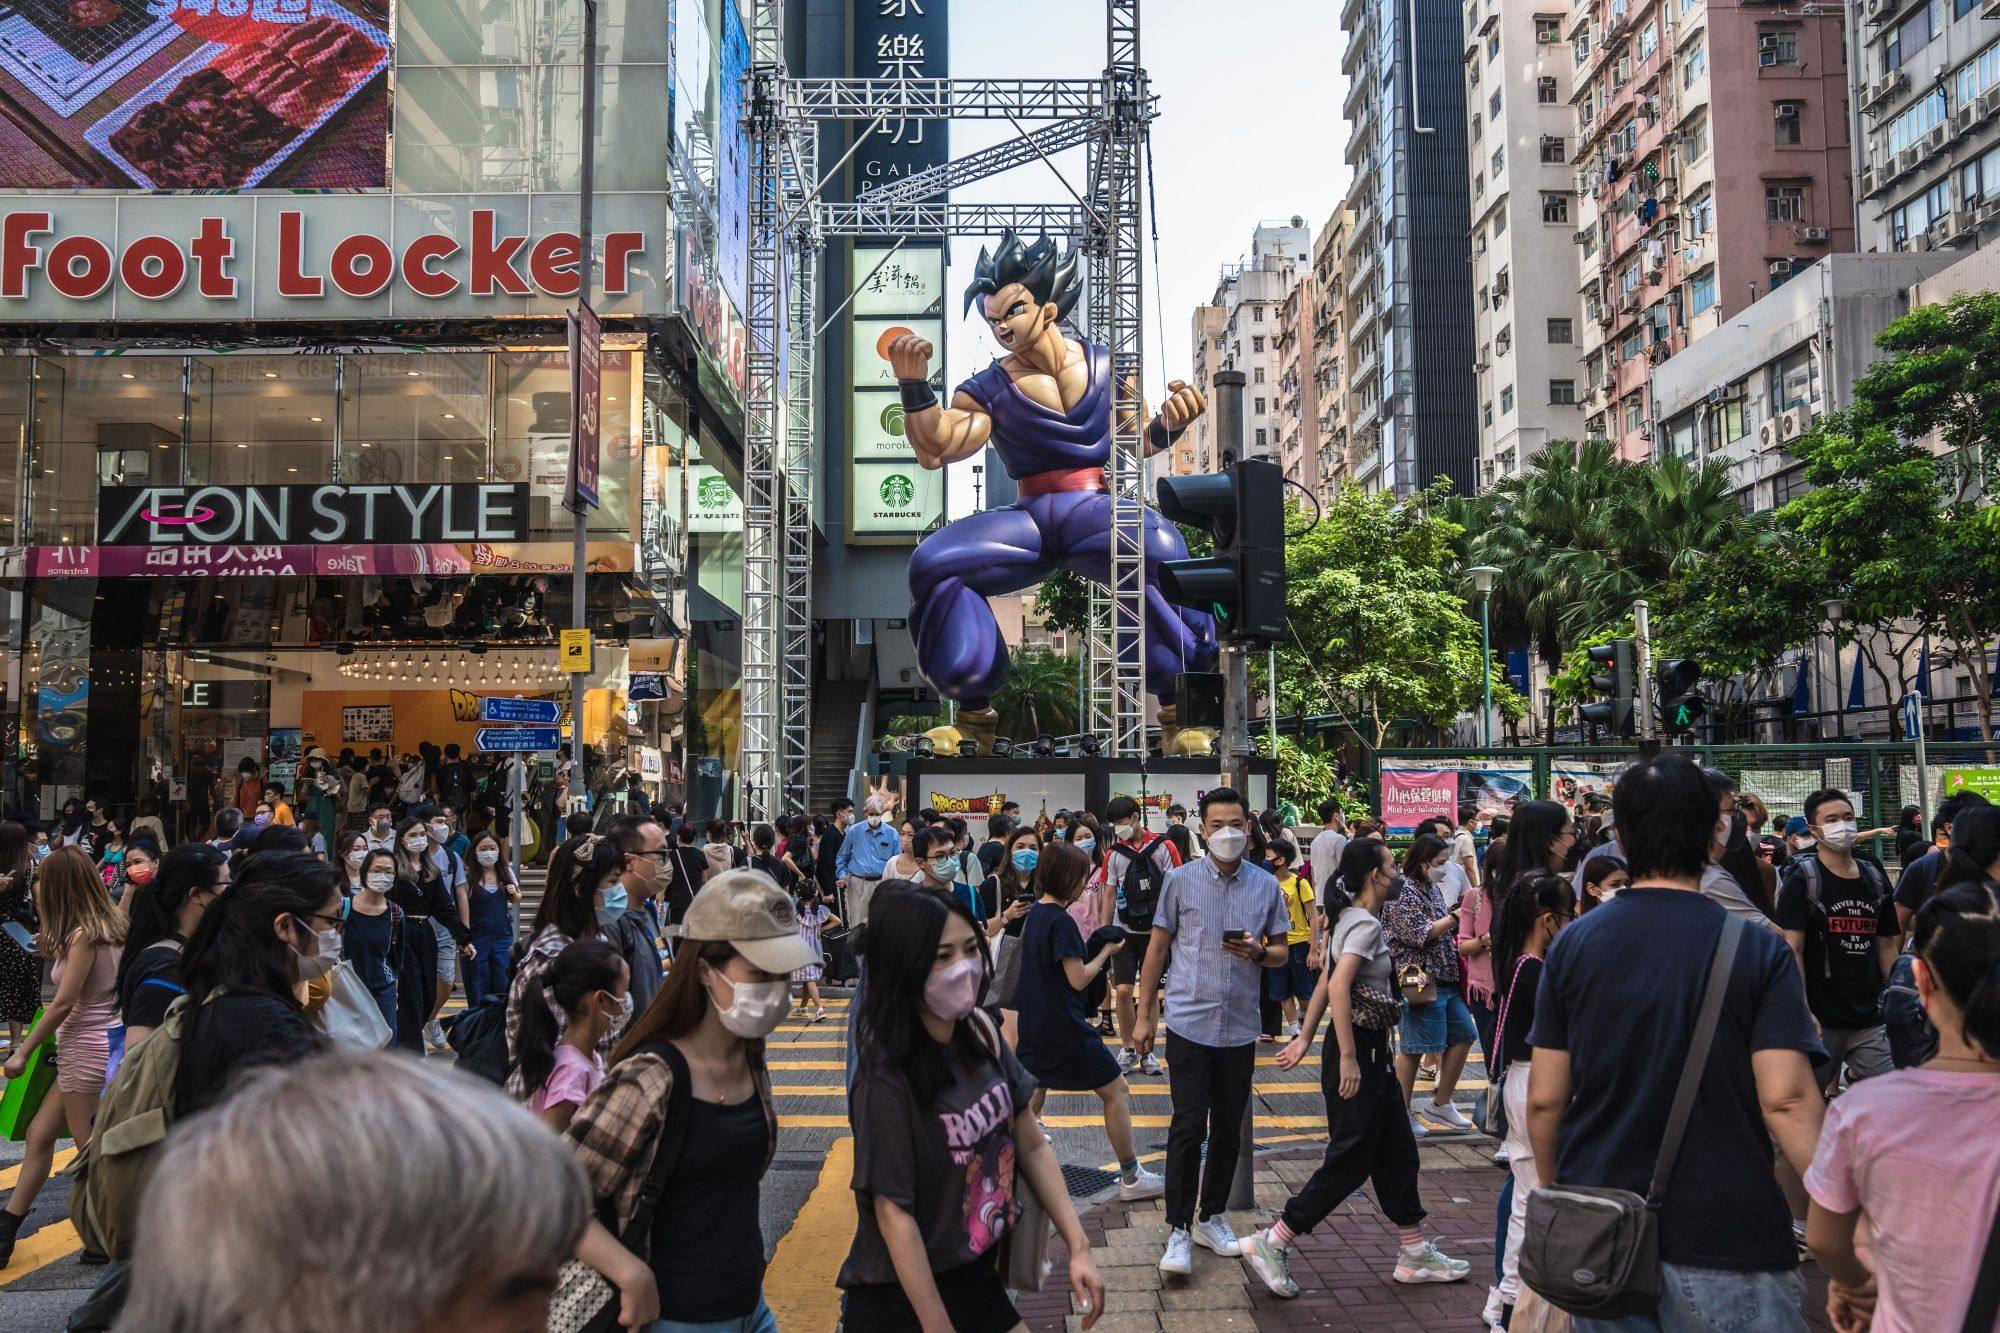 Pedestrians cross a road in Hong Kong on October 15. Hong Kong wants to bolster its status as a global financial hub following the disruptions caused by the pandemic. Photo: Bloomberg